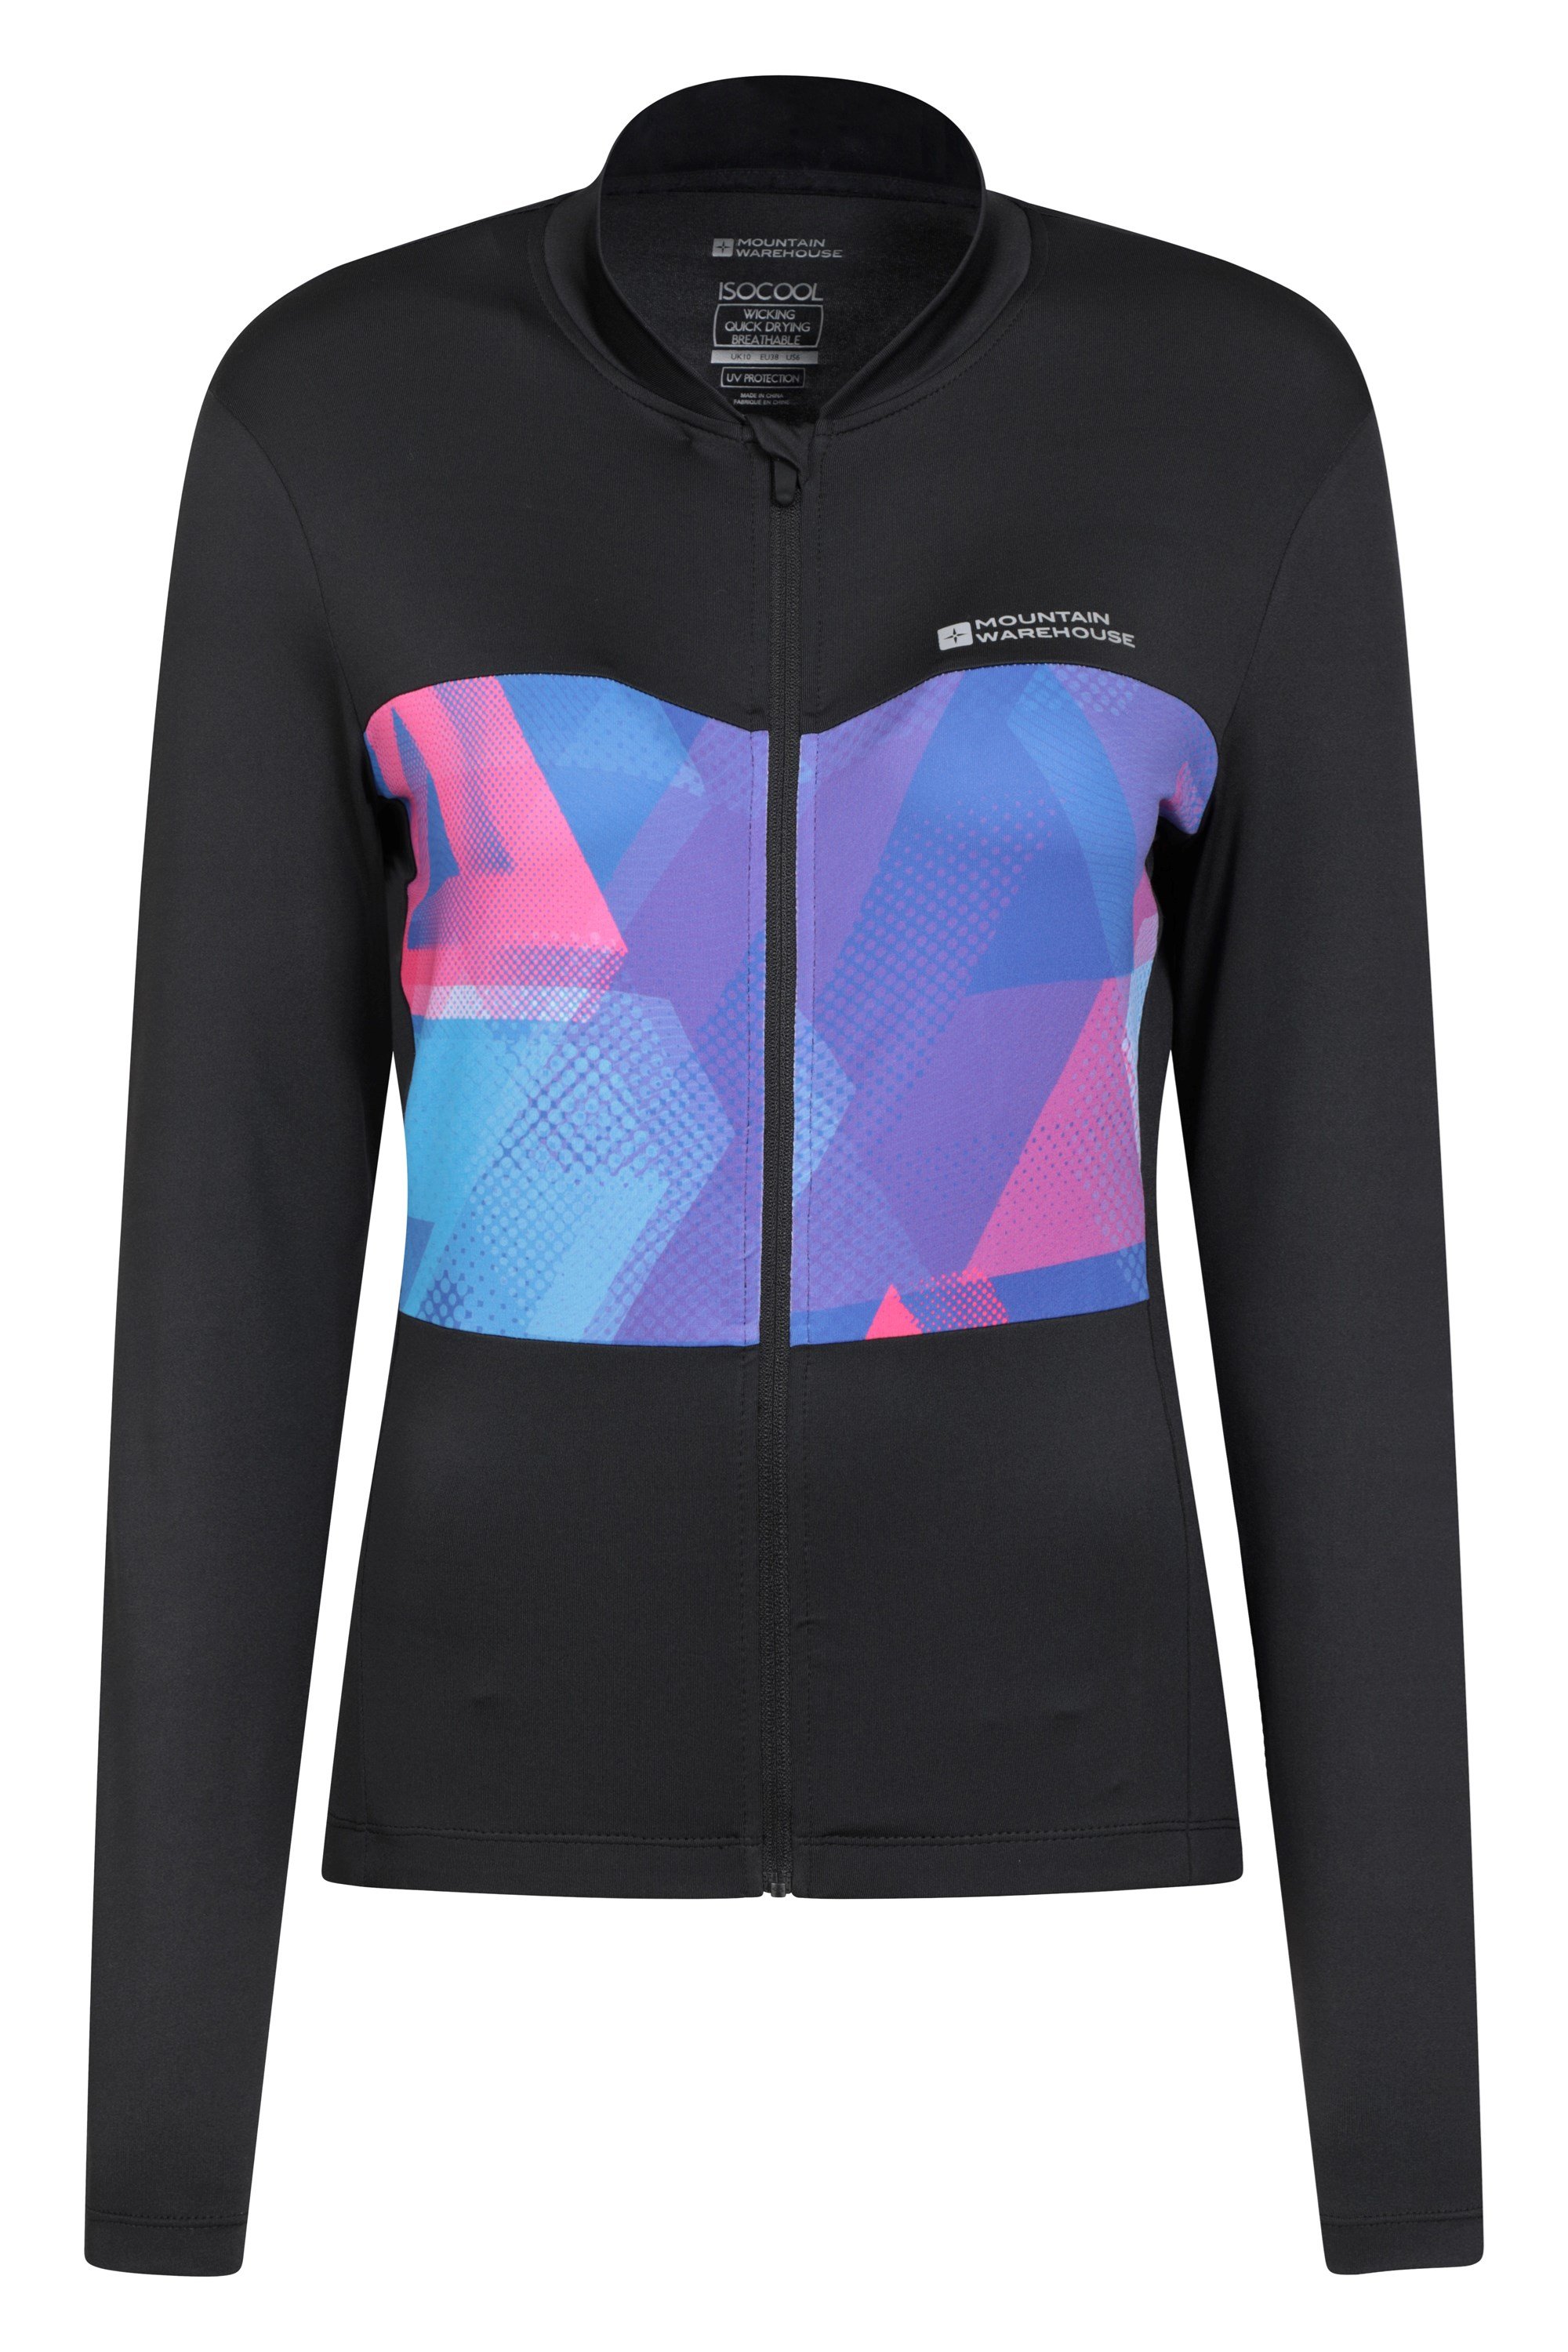 Chaser Printed Womens Full-Zip Cycling Jersey